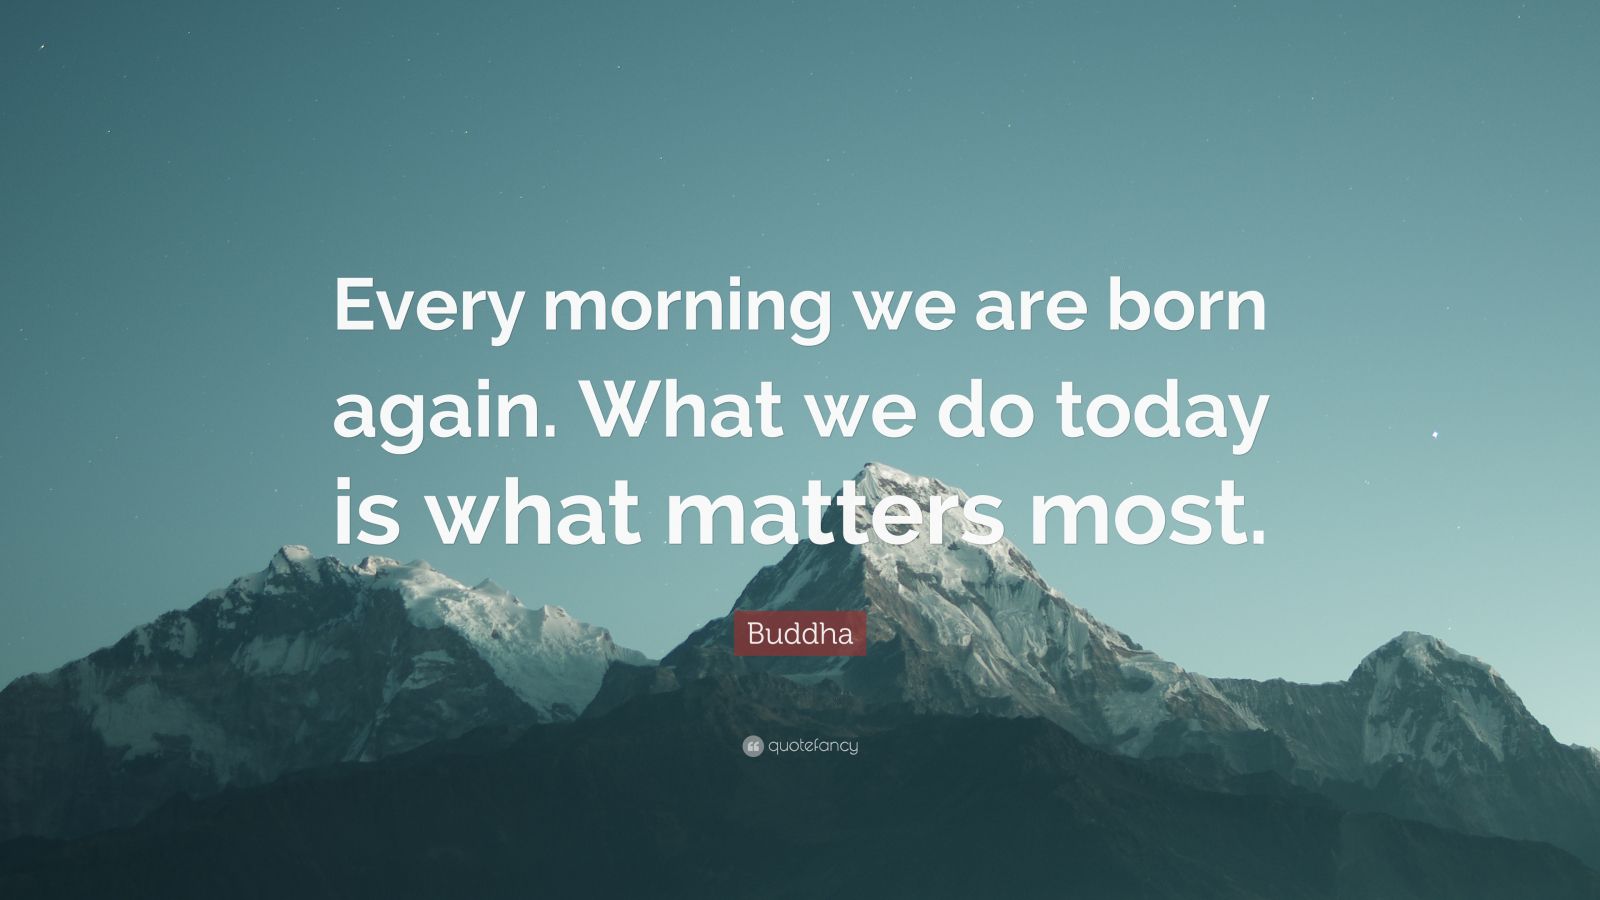 Buddha Quote: “Every morning we are born again. What we do today is